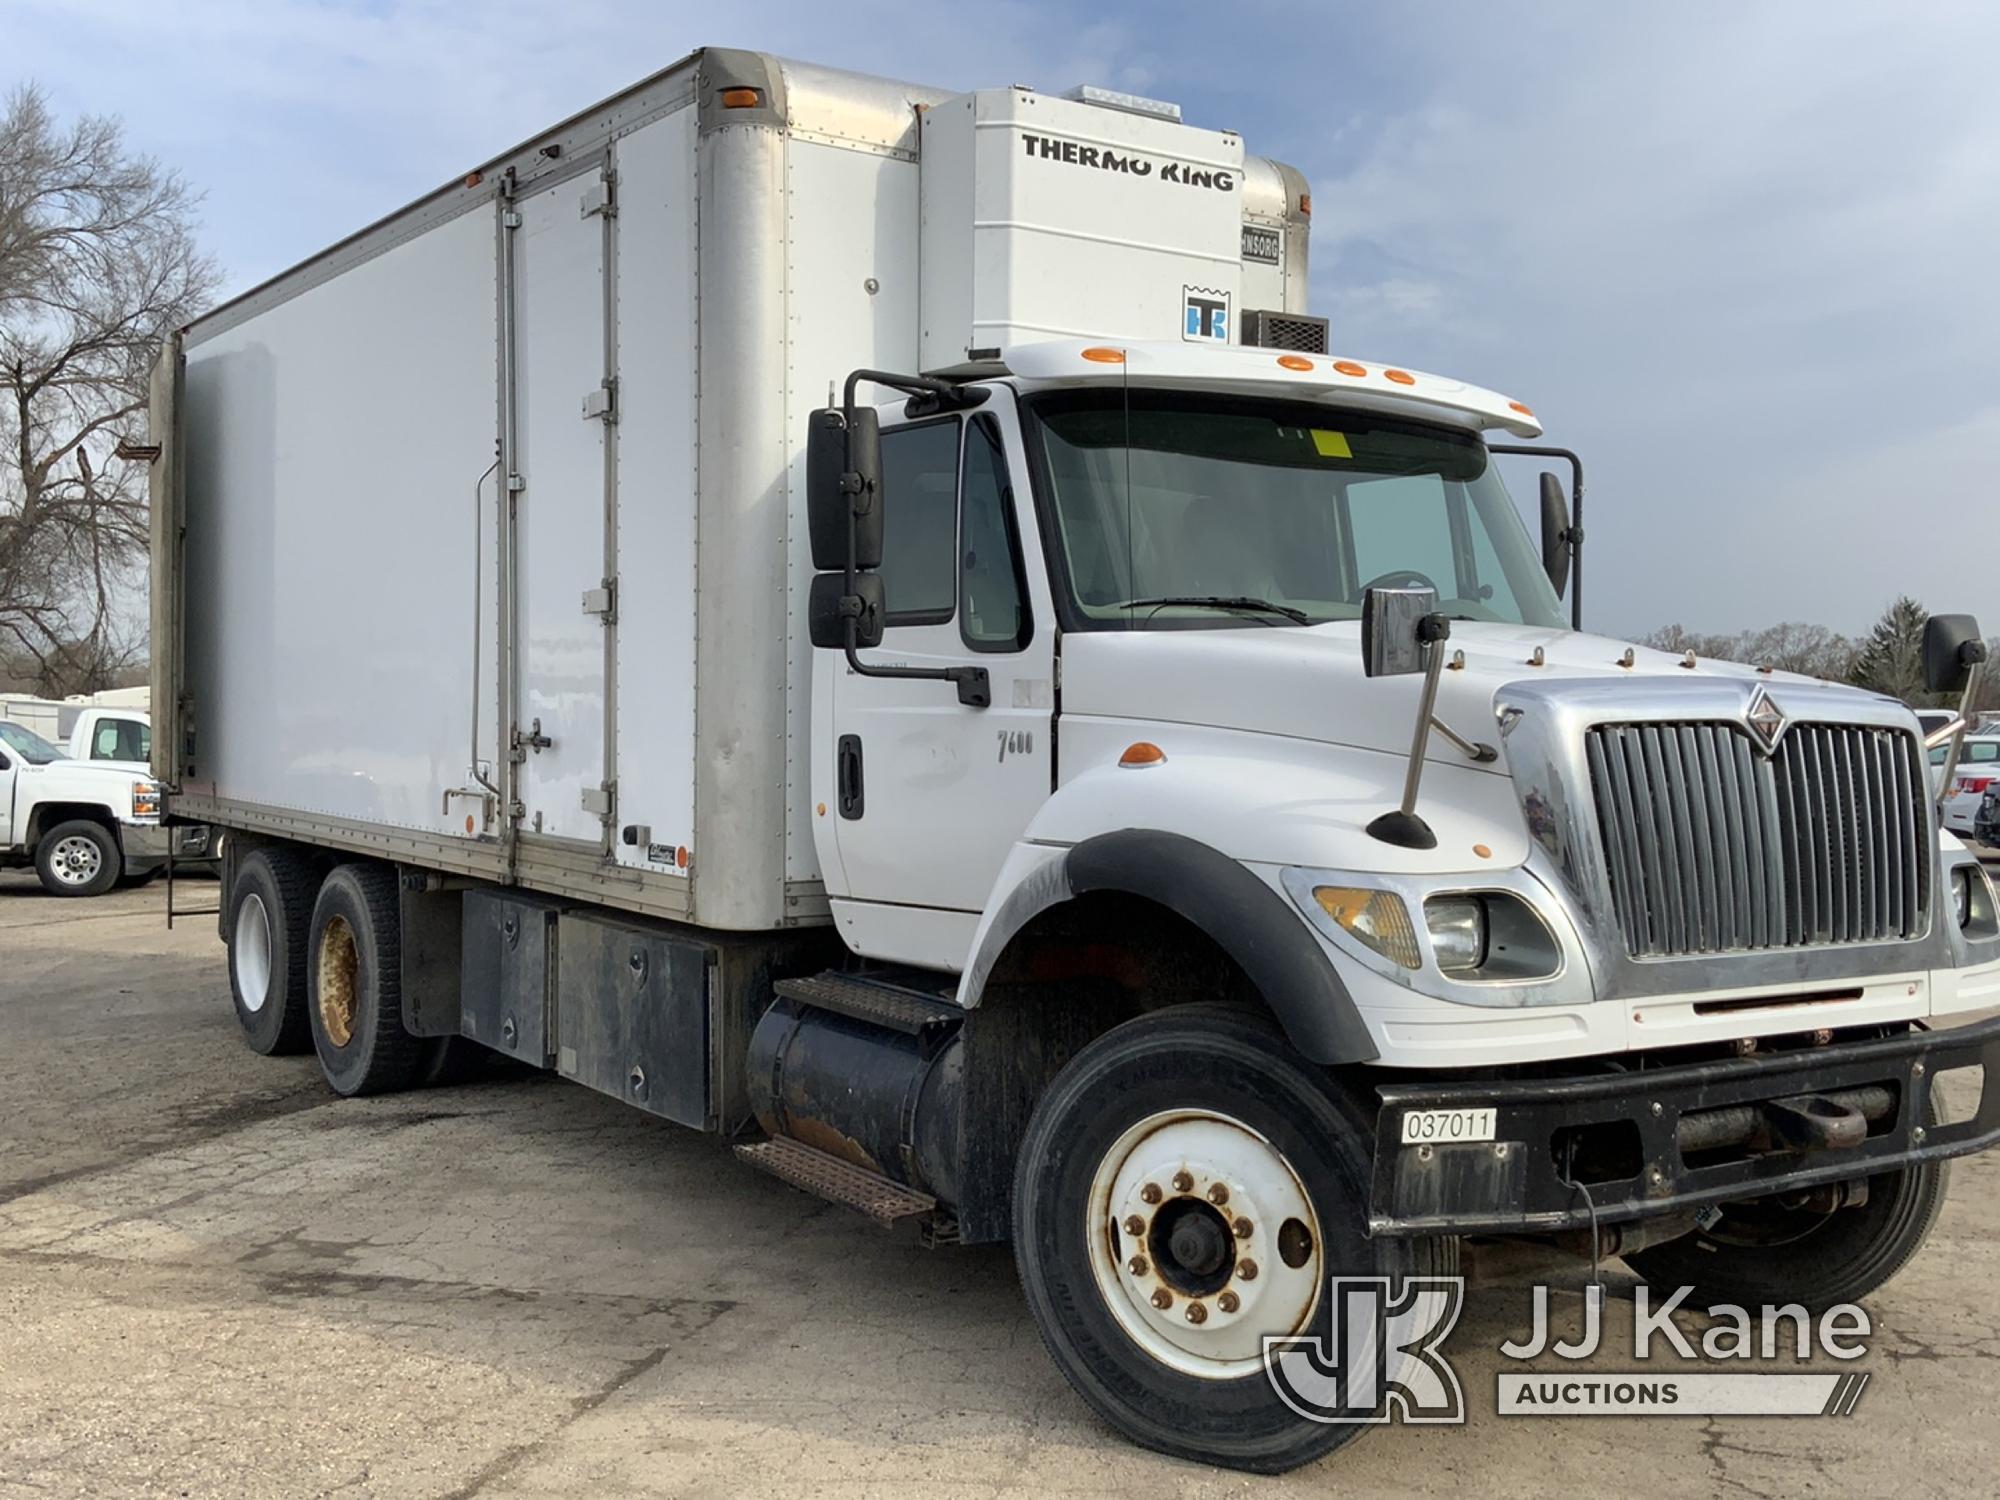 (South Beloit, IL) 2005 International 7600 T/A Van Body Truck, Stairs & Benches NOT Included Runs, M